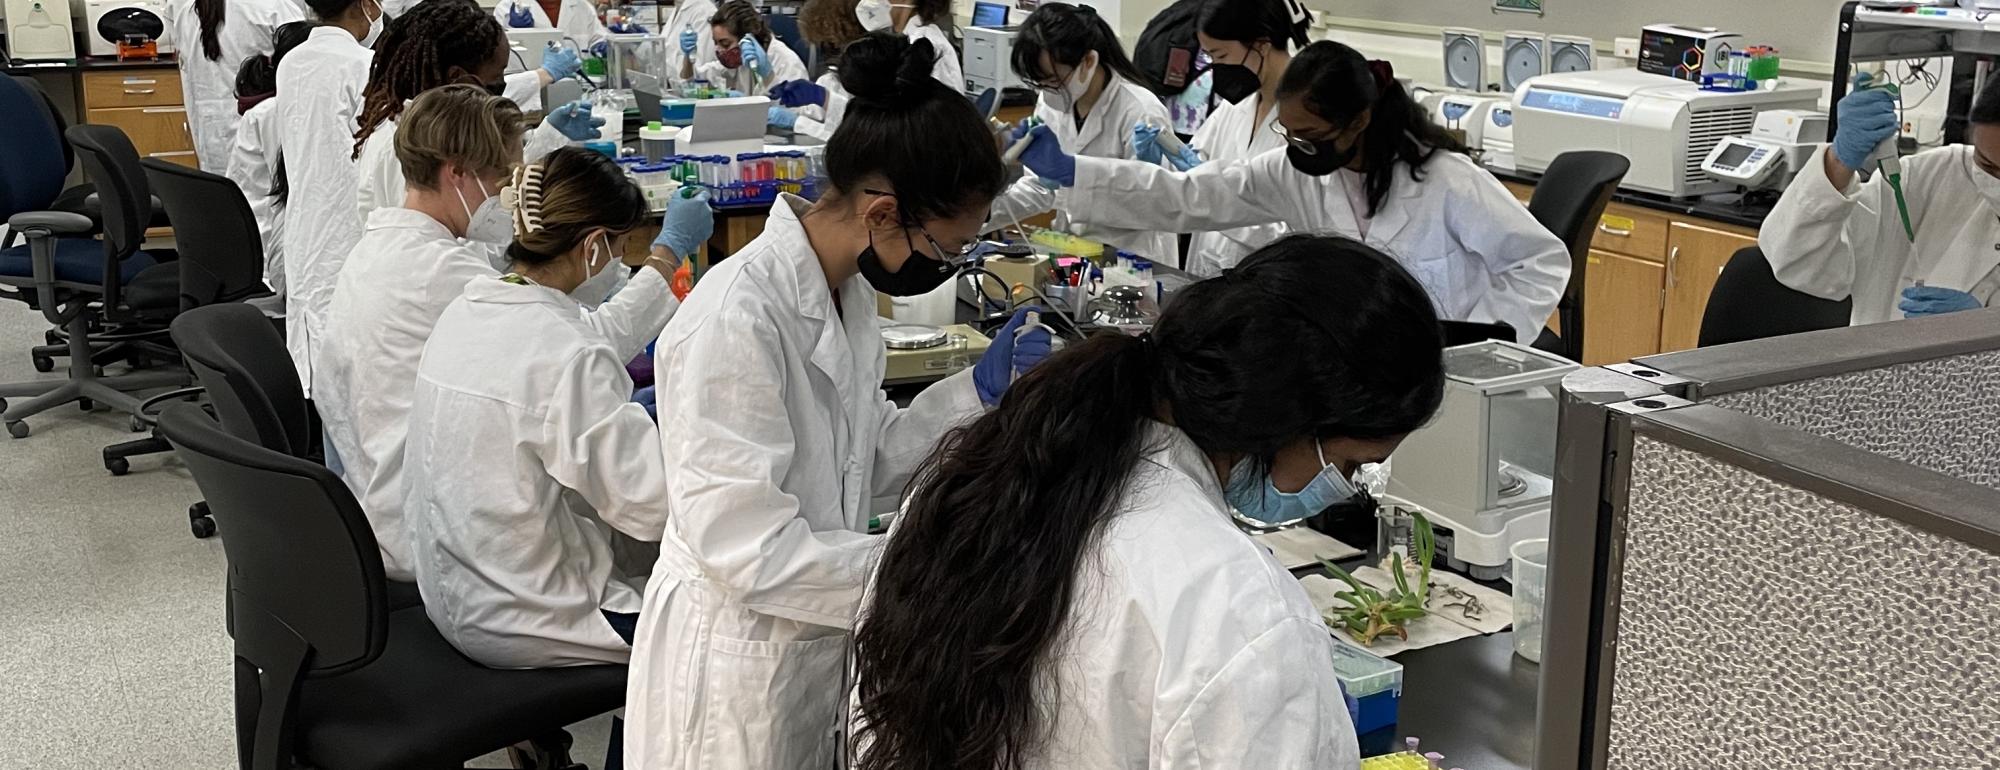 Students Training in the BioInnovation Lab